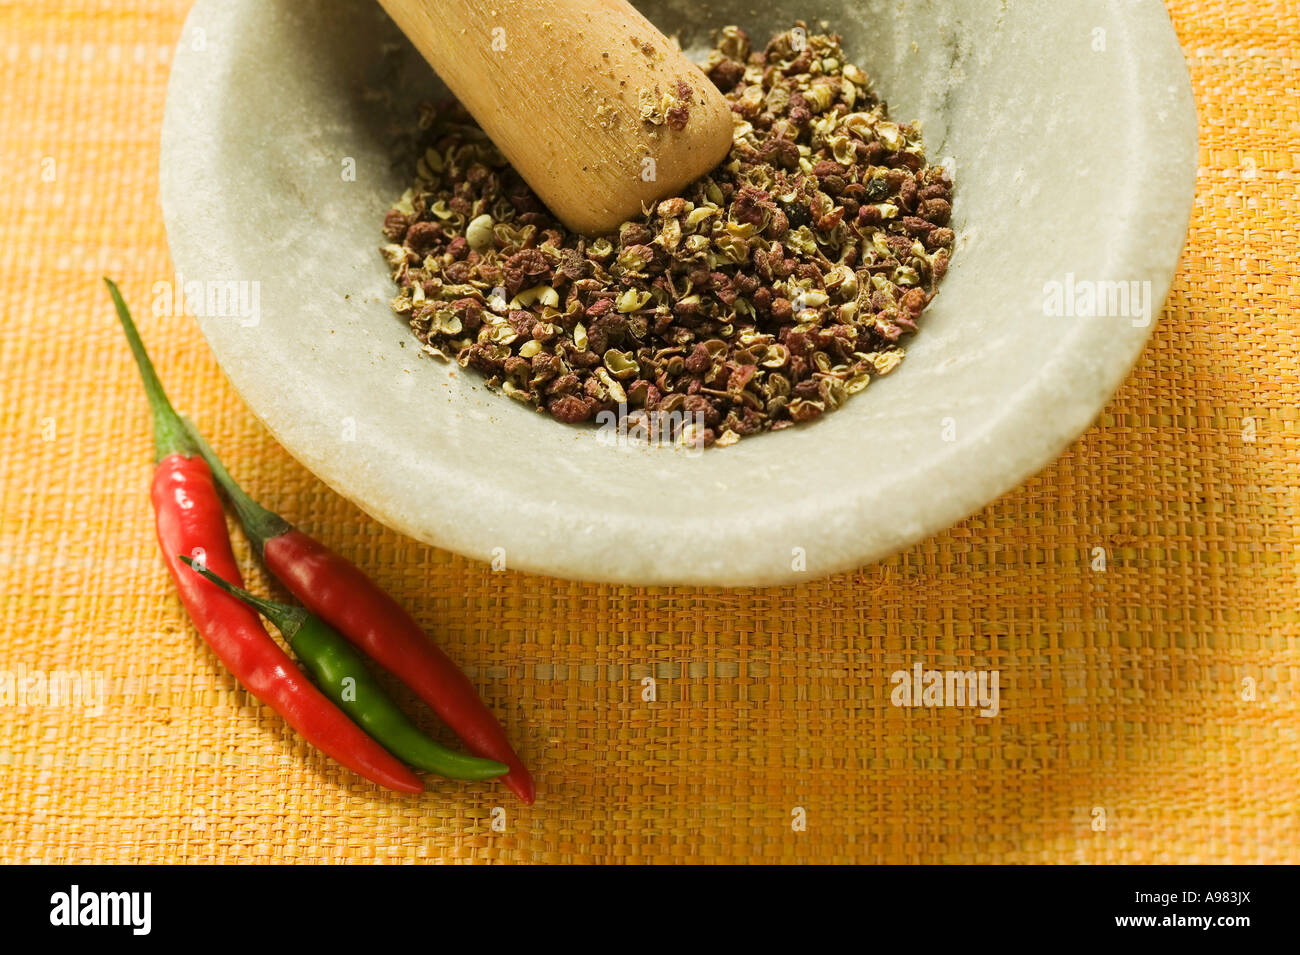 Szechuan pepper in mortar chili peppers beside it FoodCollection Stock Photo